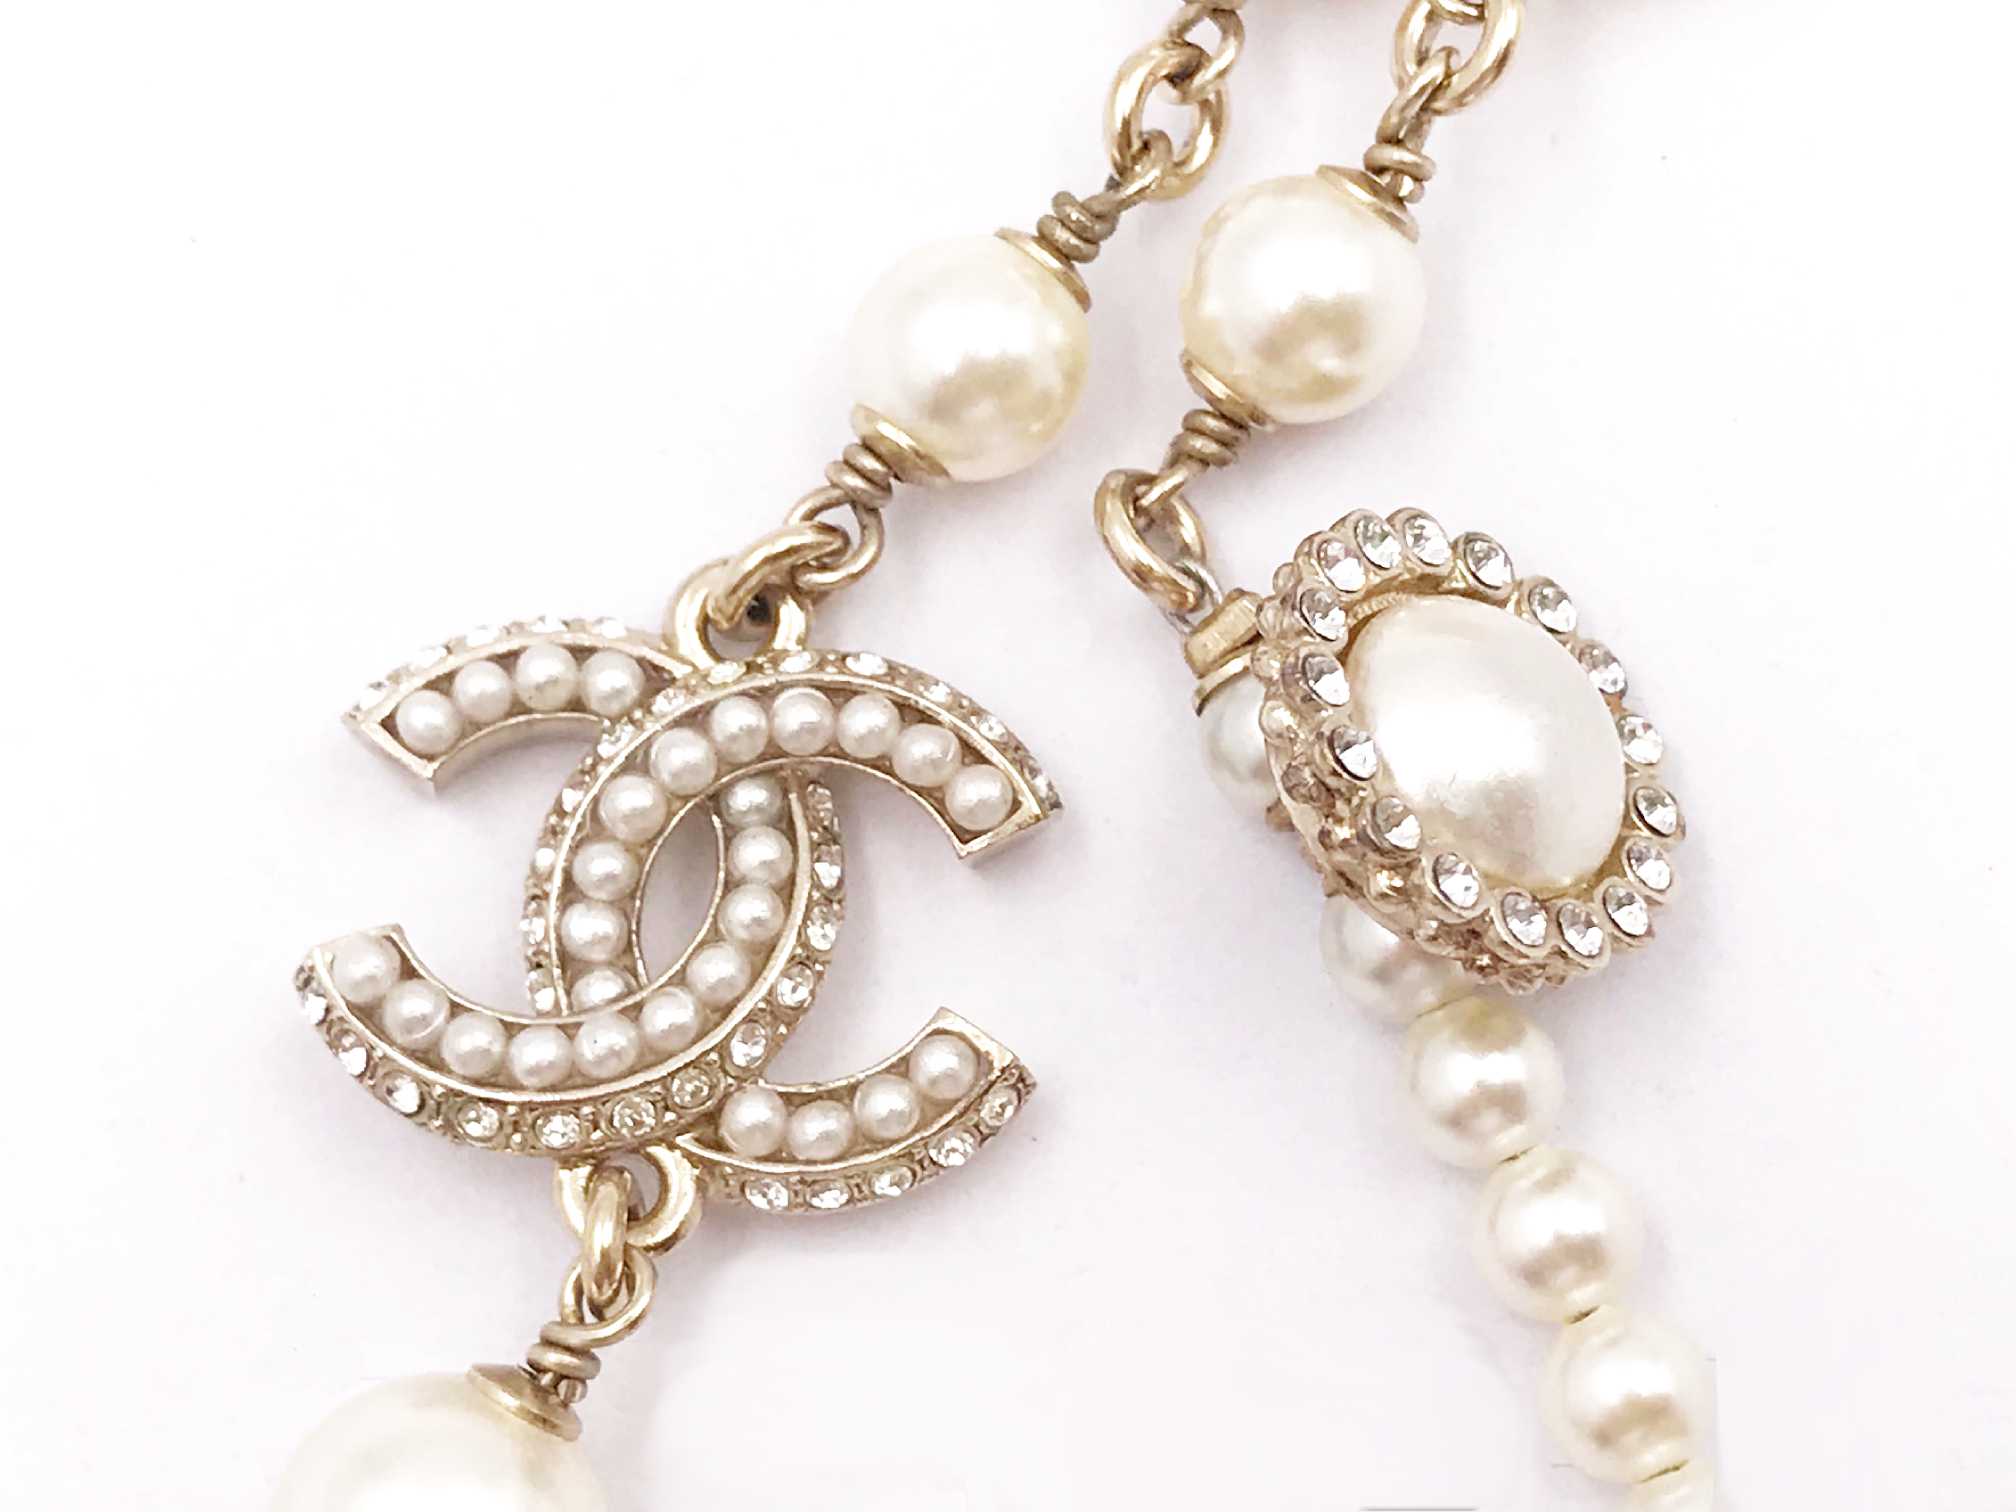 chanel necklace with pearl drop pendant